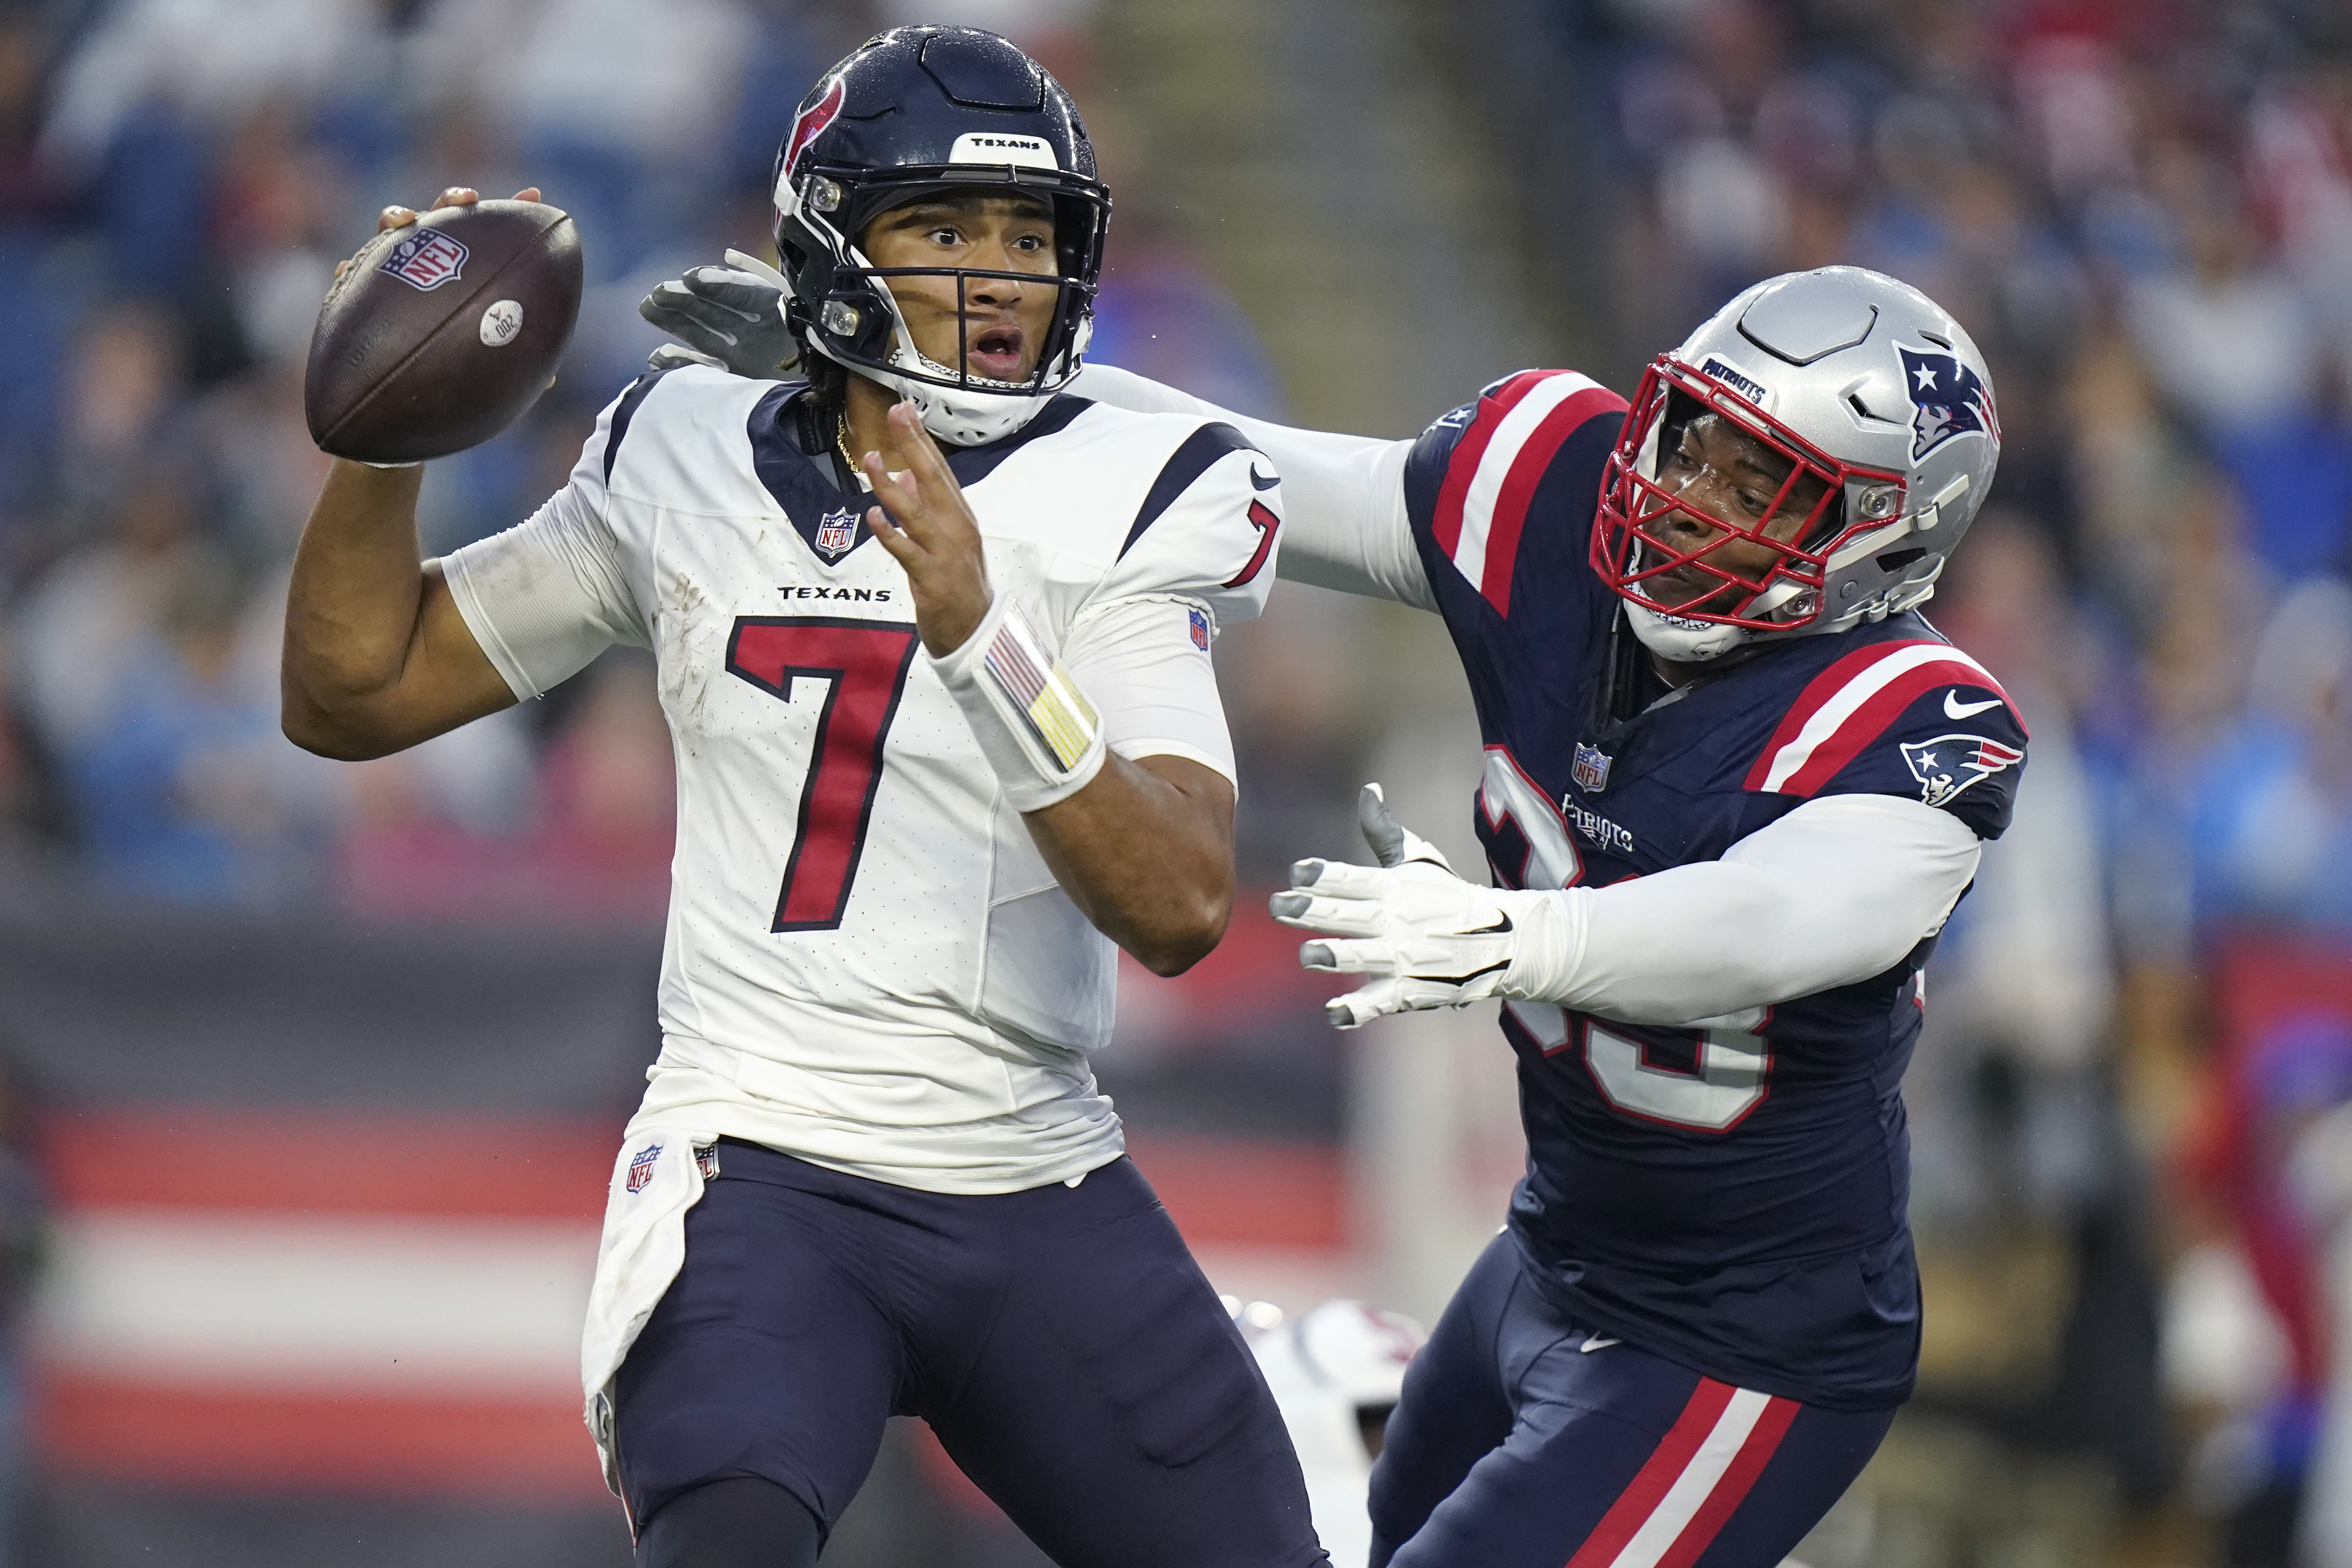 Football is back and so are we! The #Texans beat the #Patriots in